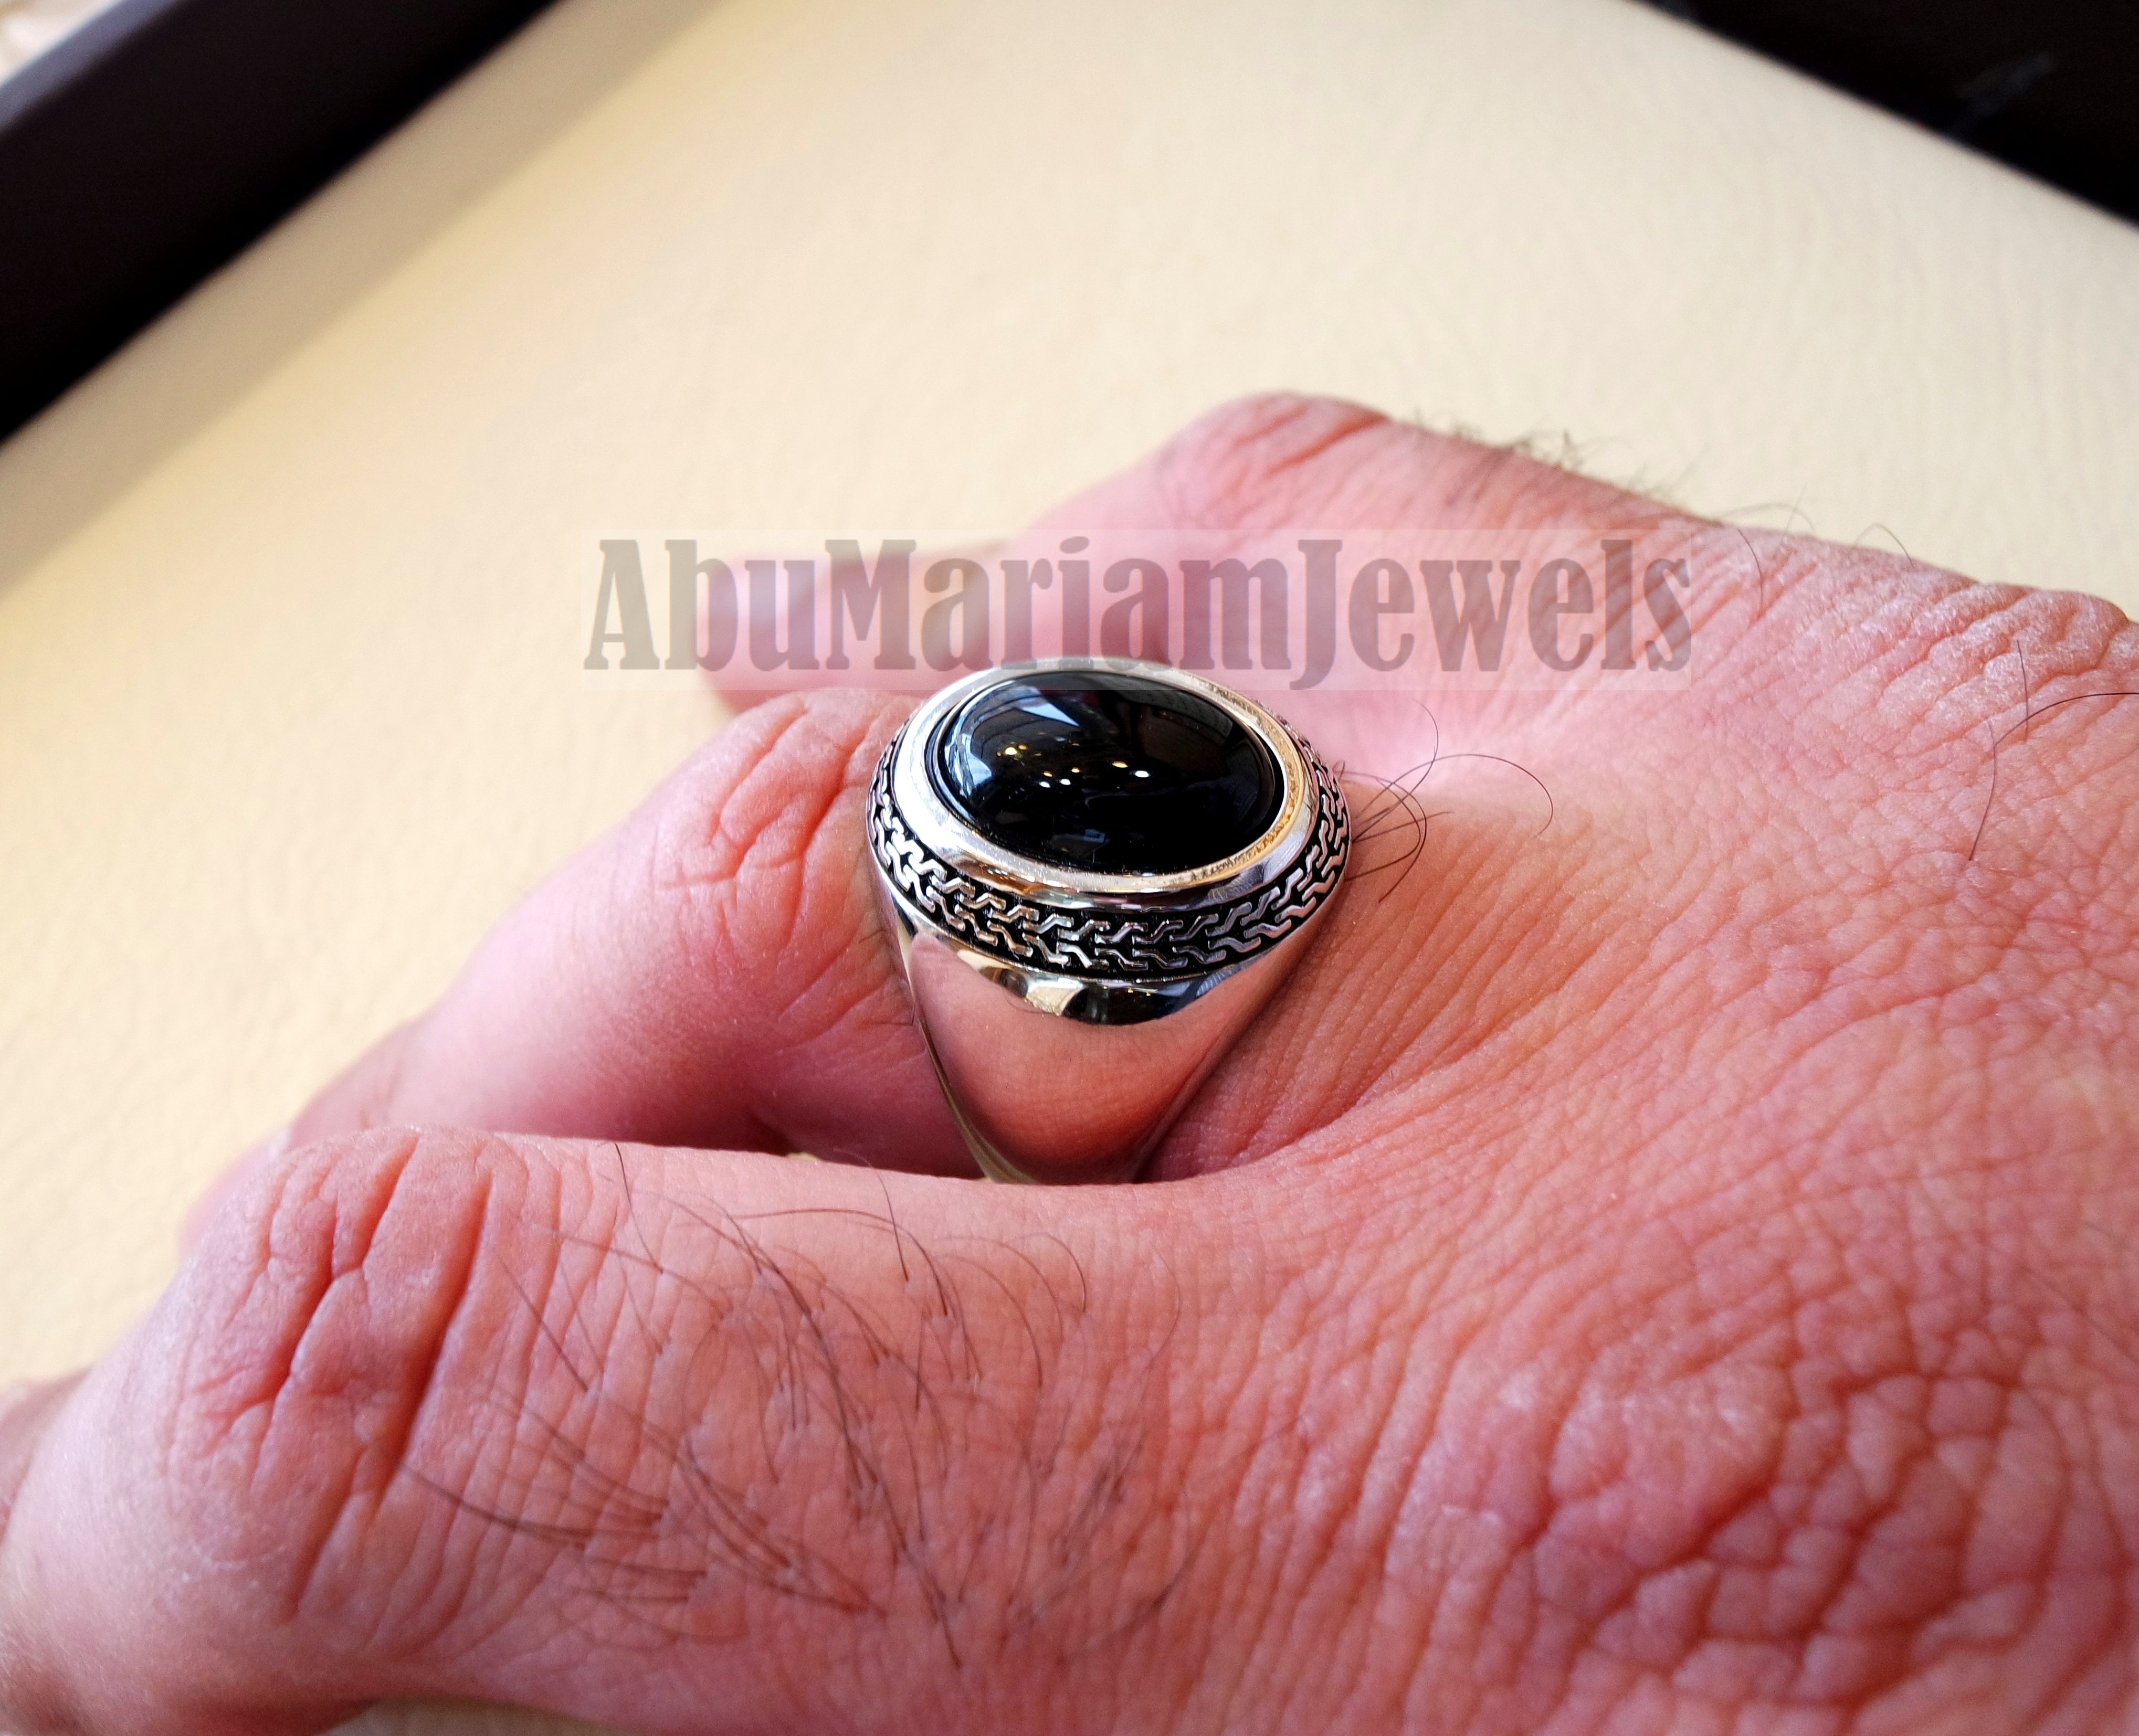 man ring sterling silver 925 all sizes onyx natural agate semi precious cabochon black gem Arabic Turkey antique middle eastern jewelry